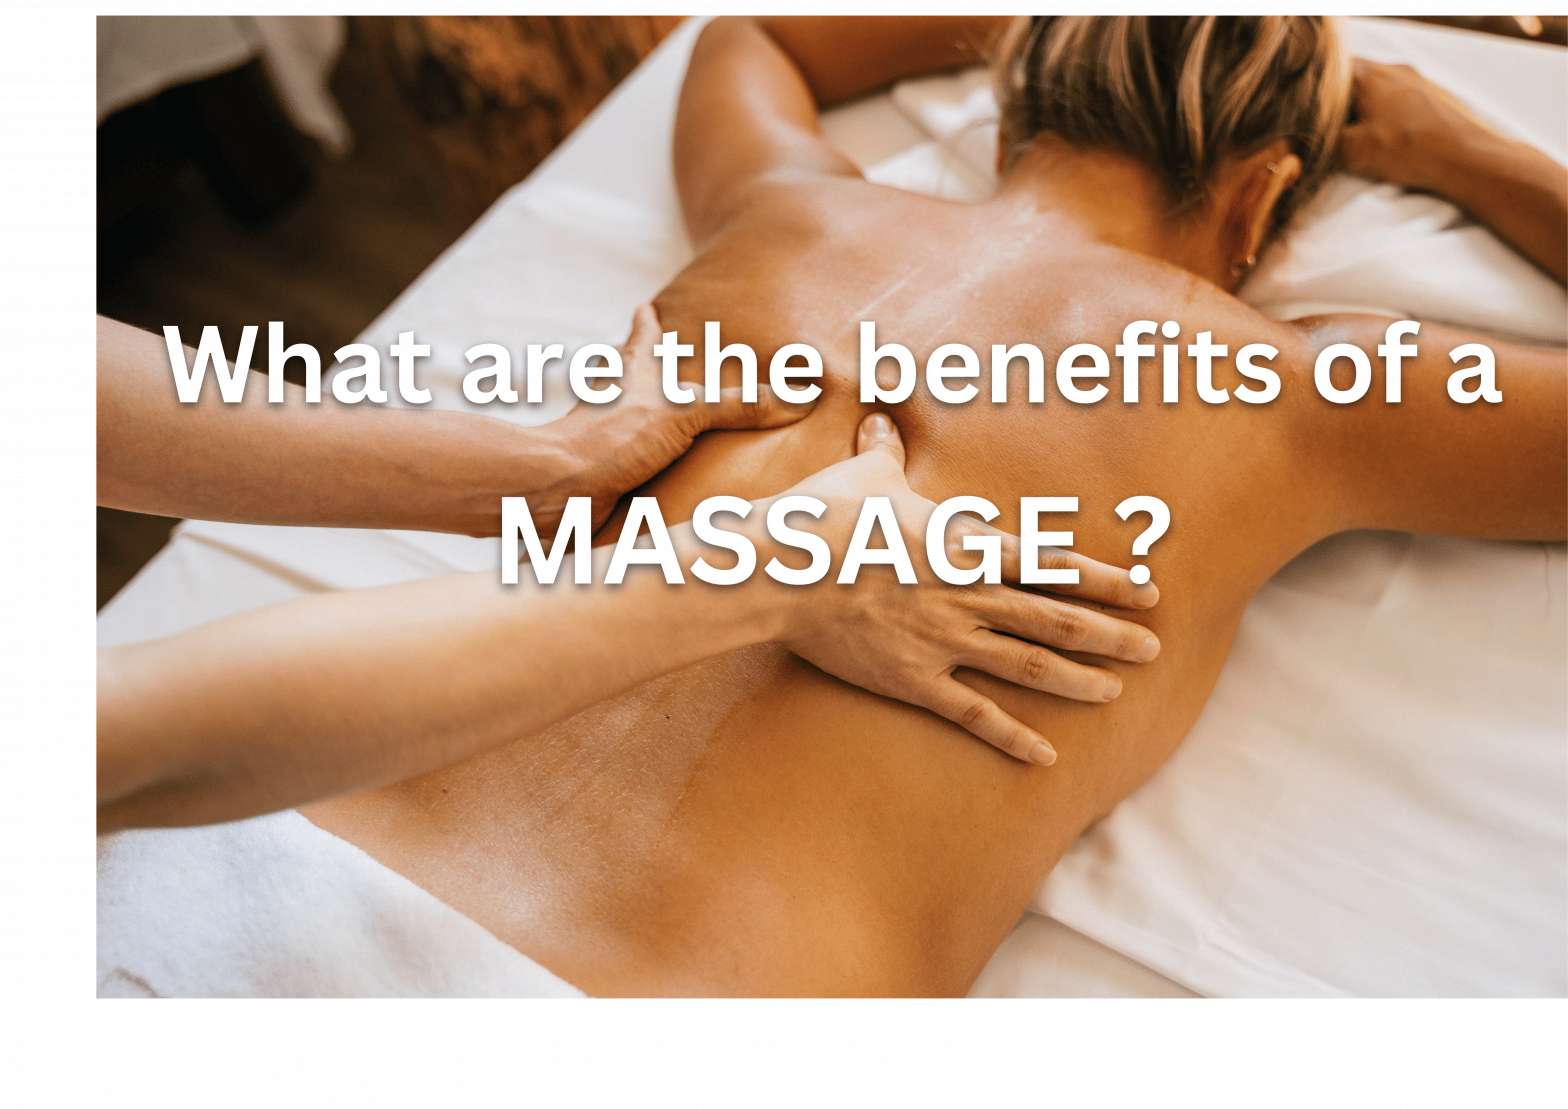 What are the benefits of a MASSAGE